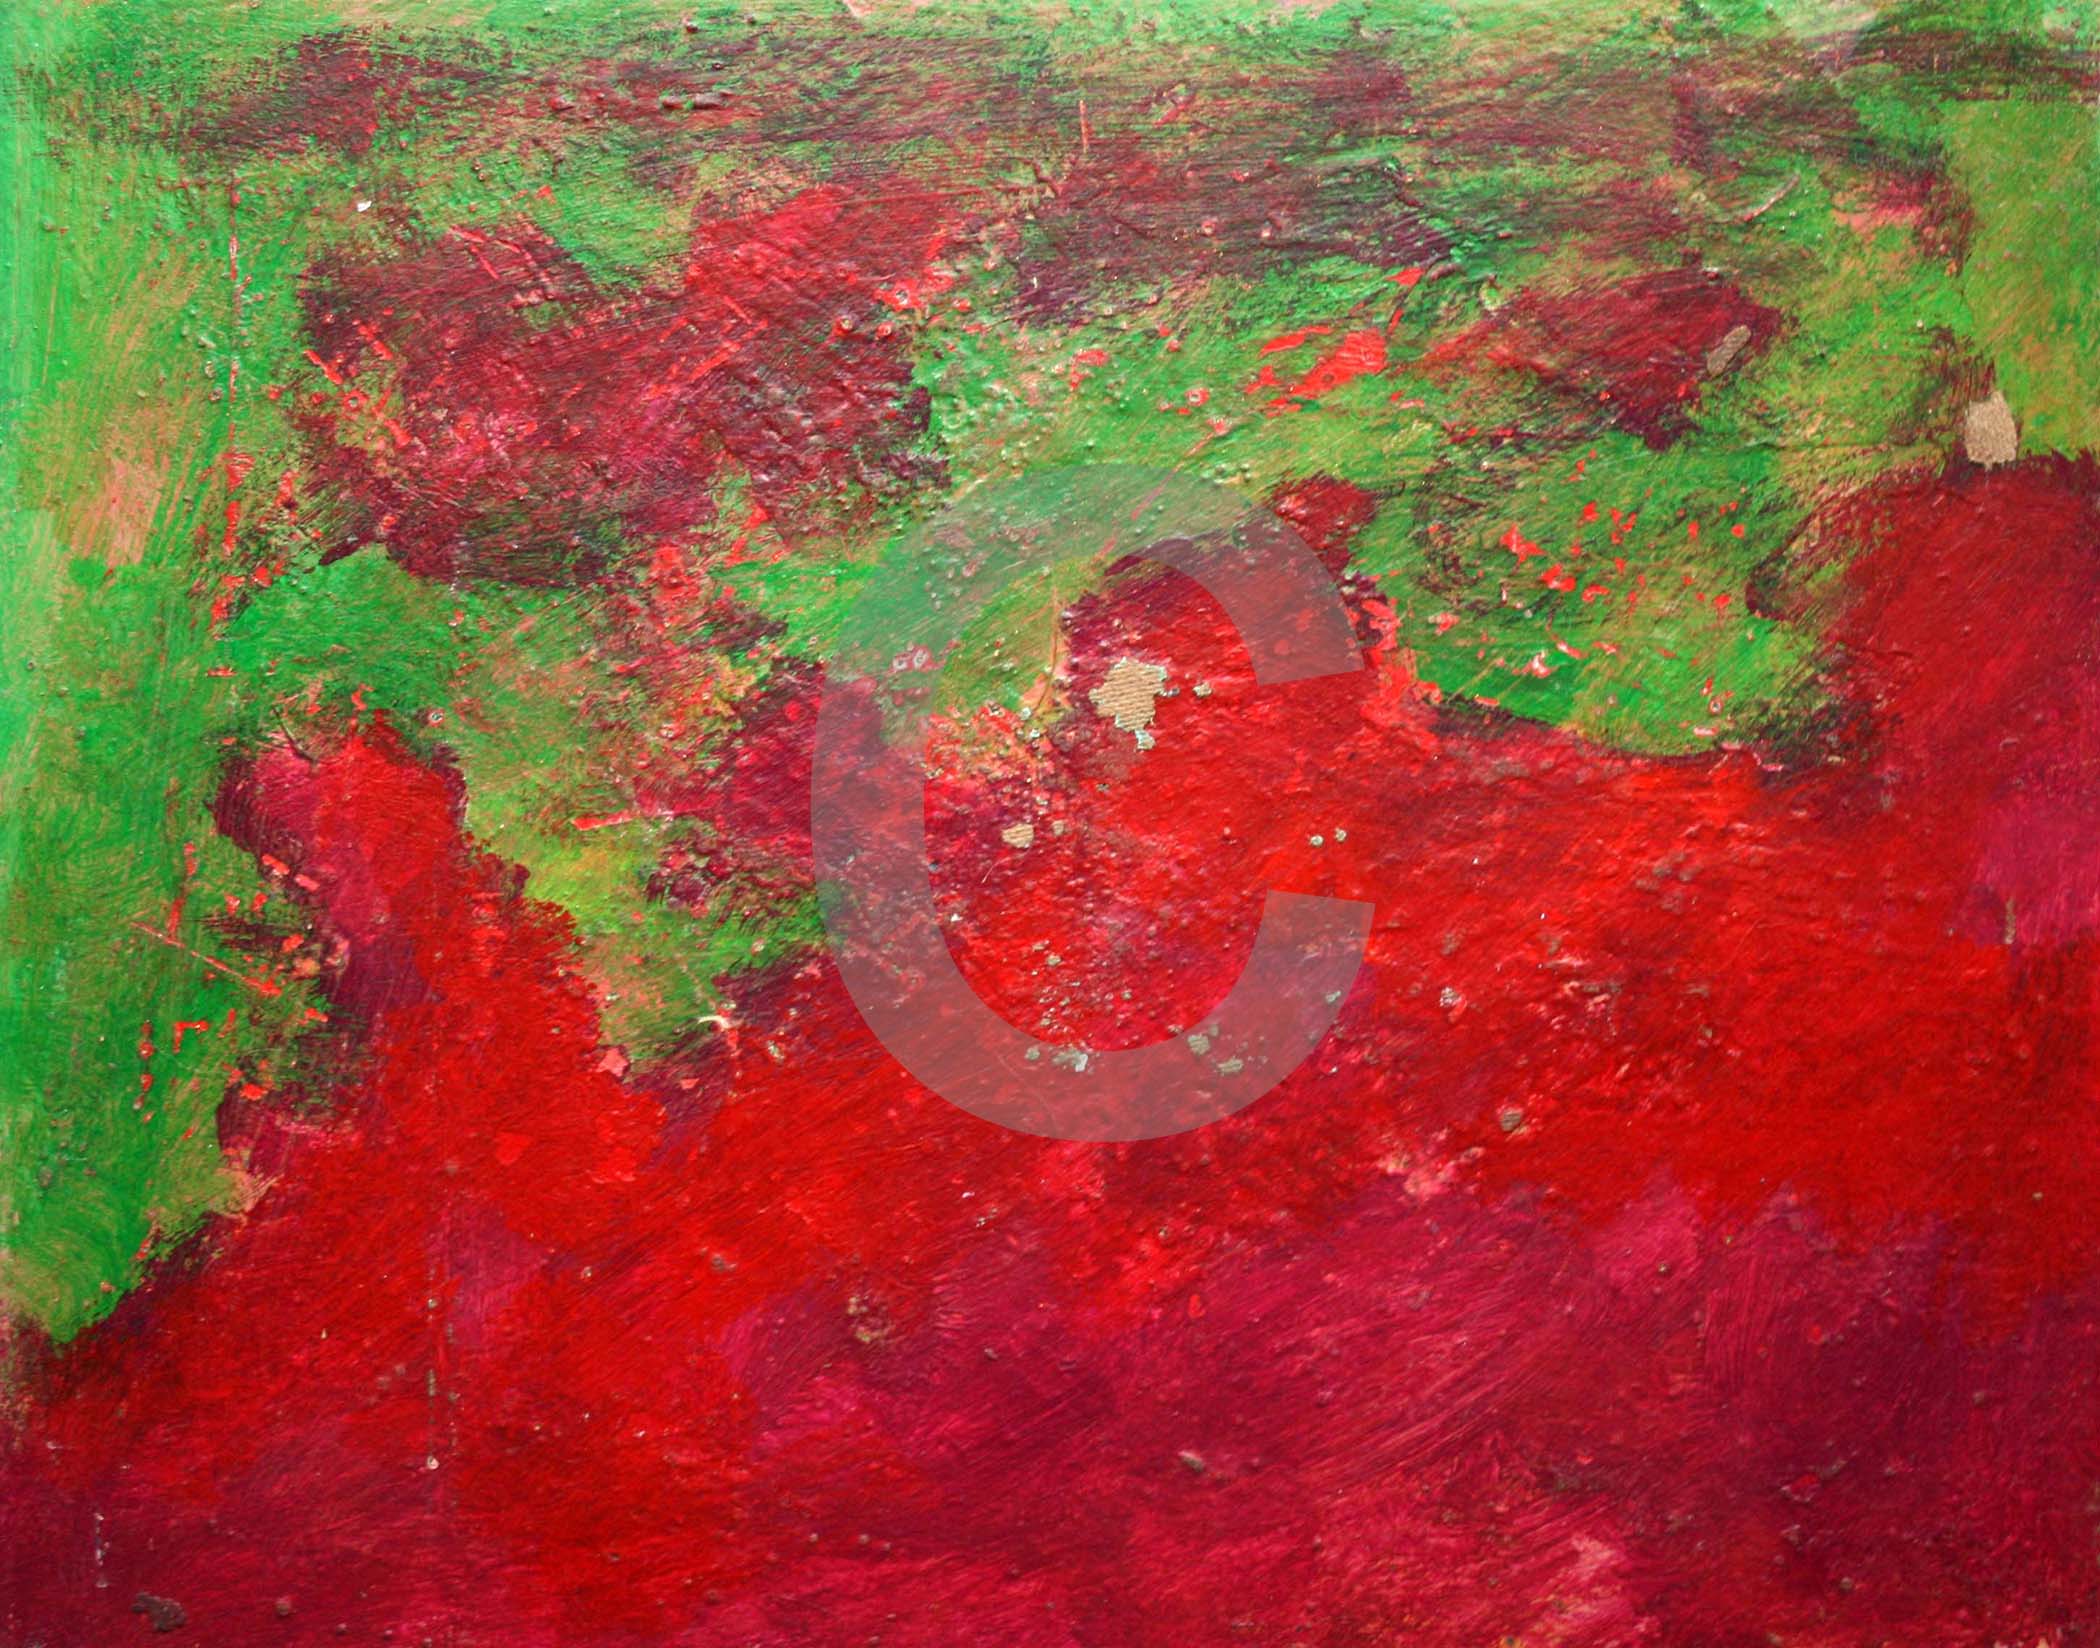 Beautiful abstract fine art for sale. Oil Acrylic Artistic Paintings Choose from All Colors